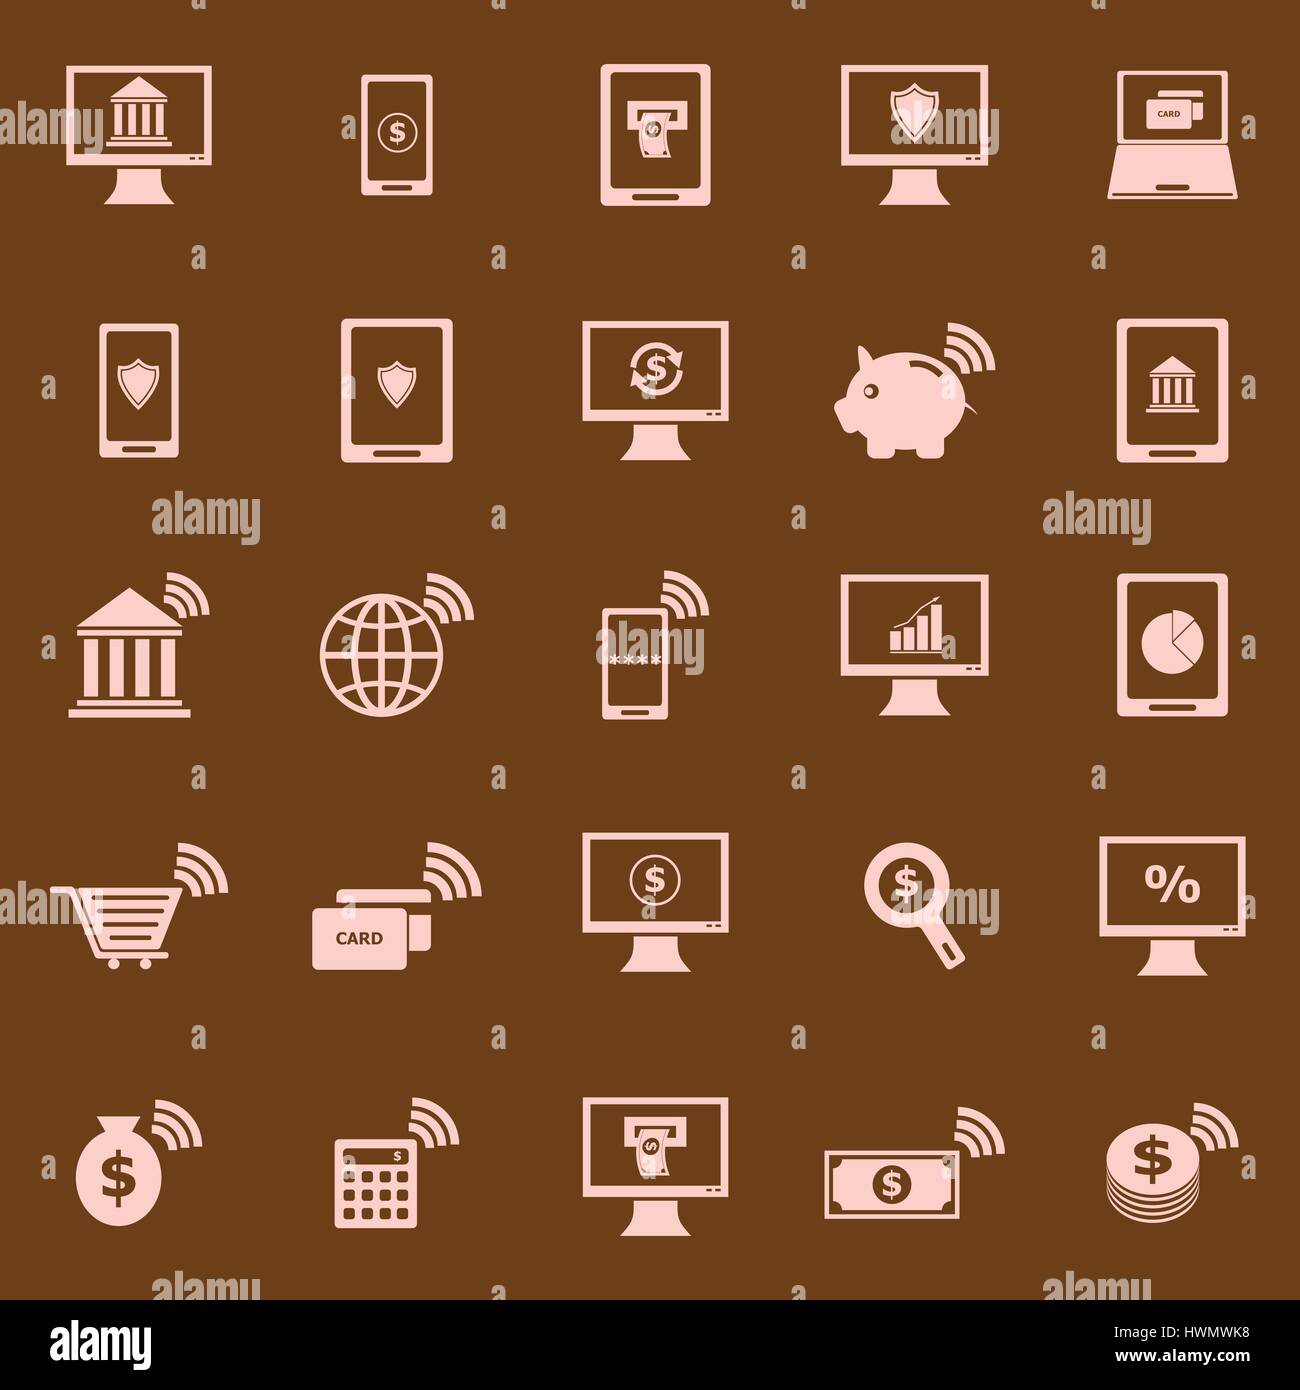 Online banking color icons on brown background, stock vector Stock Vector